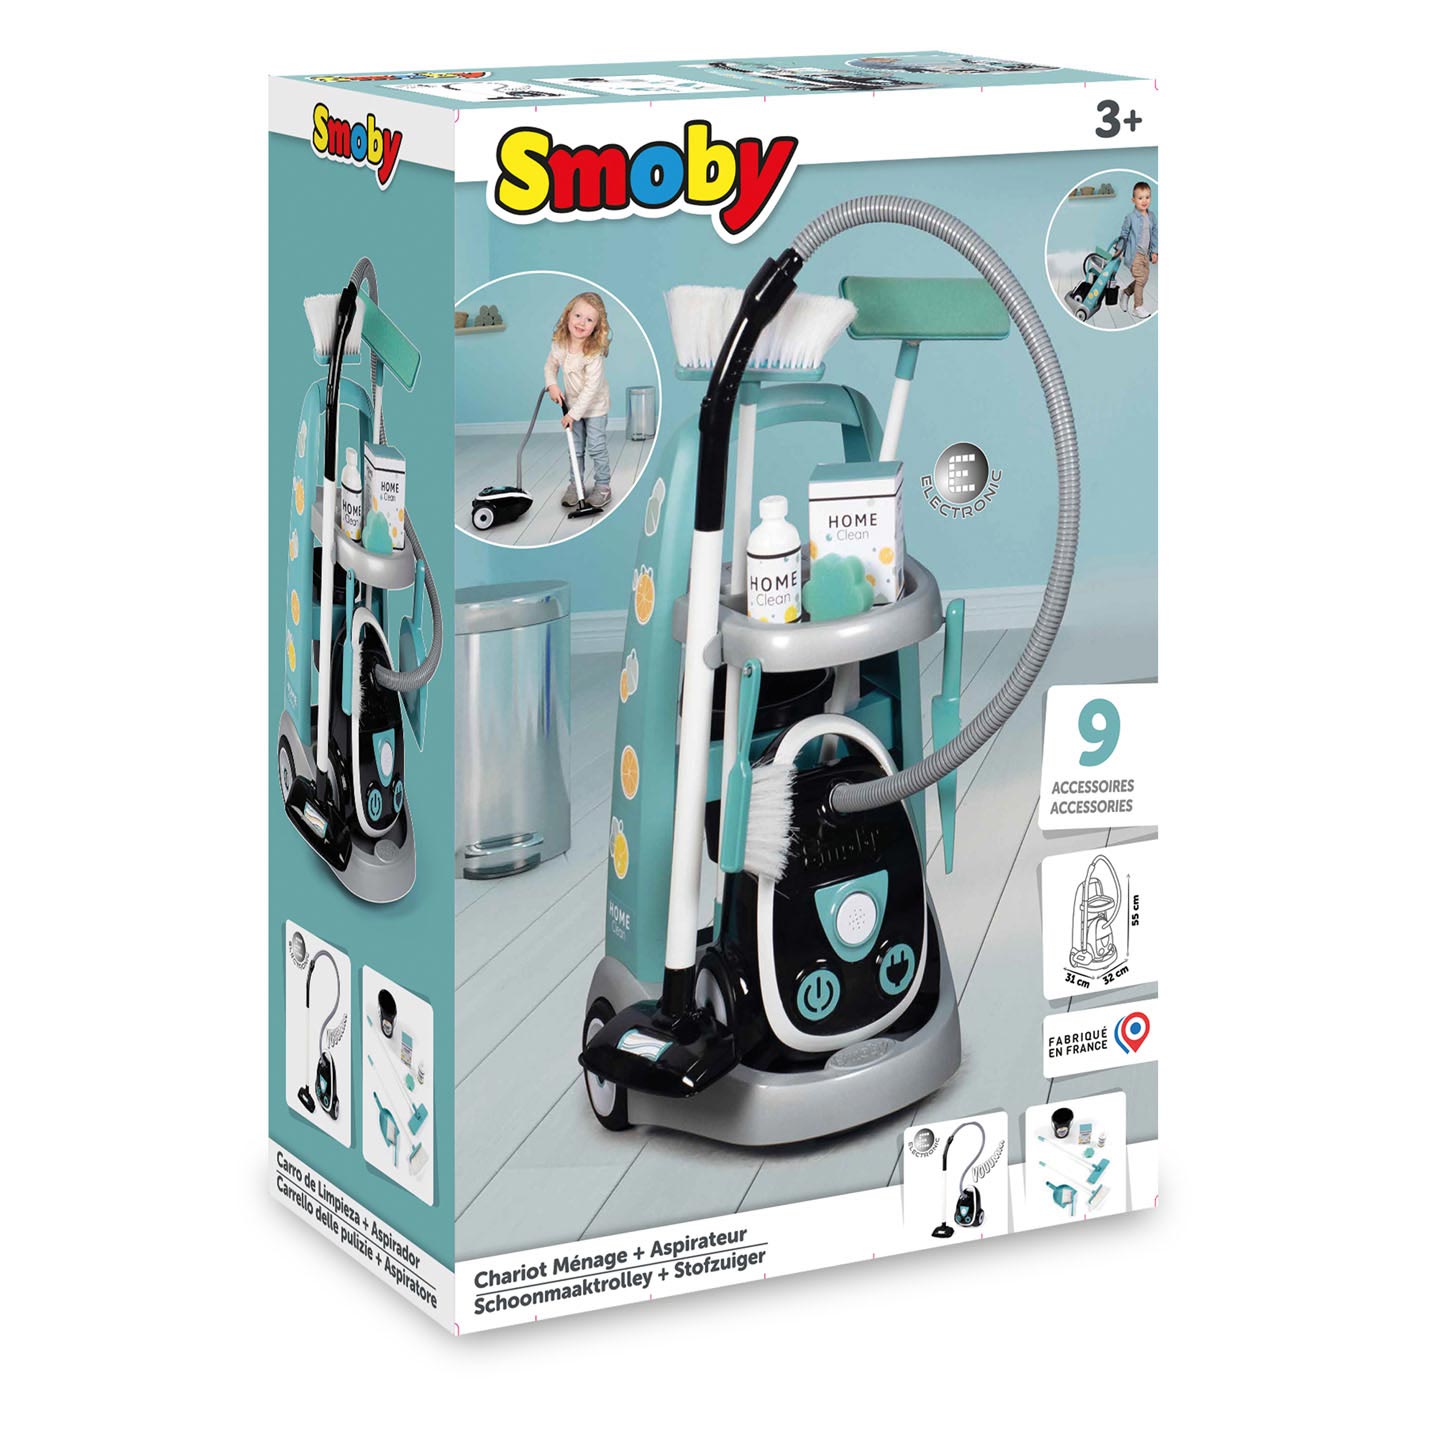 Smoby Cleaning trolley with vacuum | Thimble 8 Toys cleaner, pcs